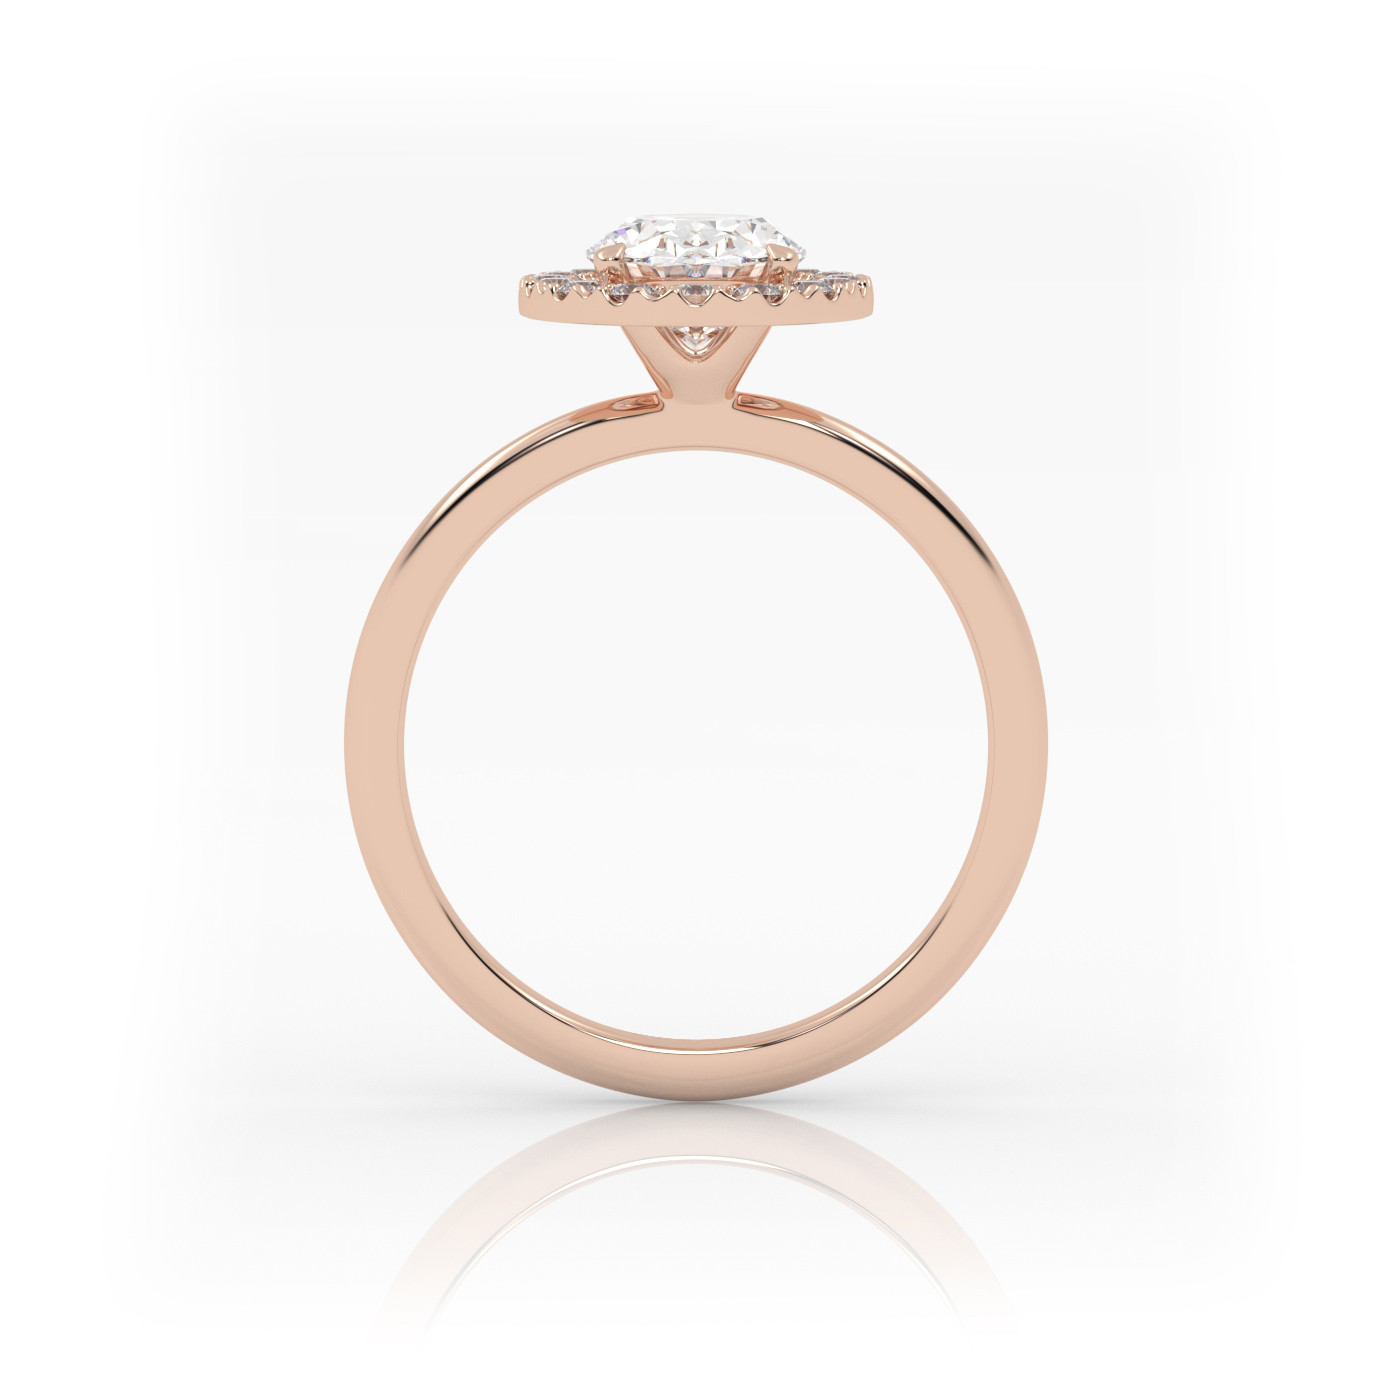 18K ROSE GOLD Oval Diamond Engagement Ring with Halo Style